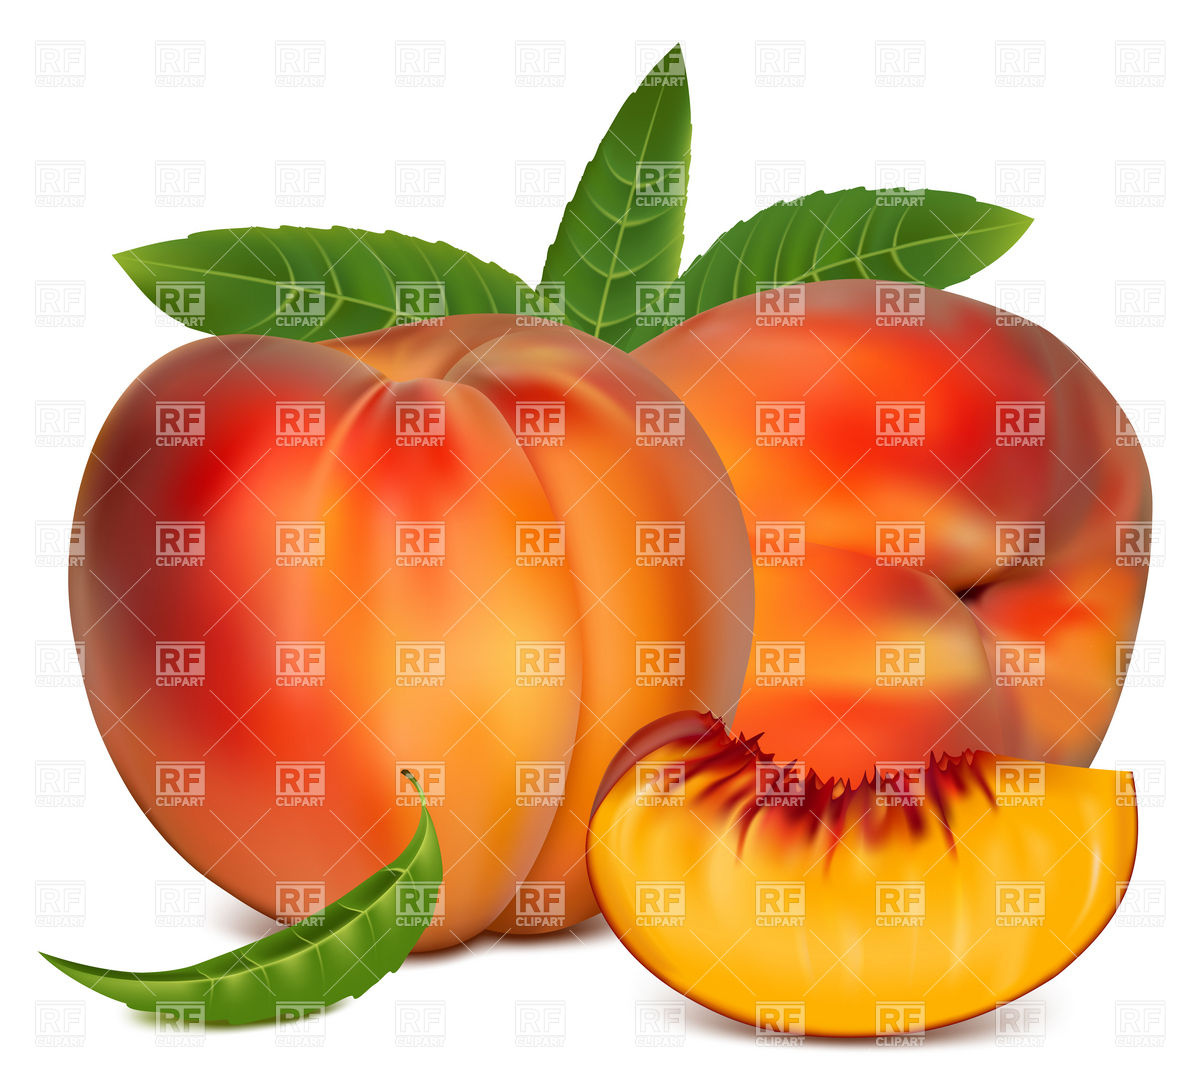 Peach Fruit With Green Leaves Download Royalty Free Vector Clipart